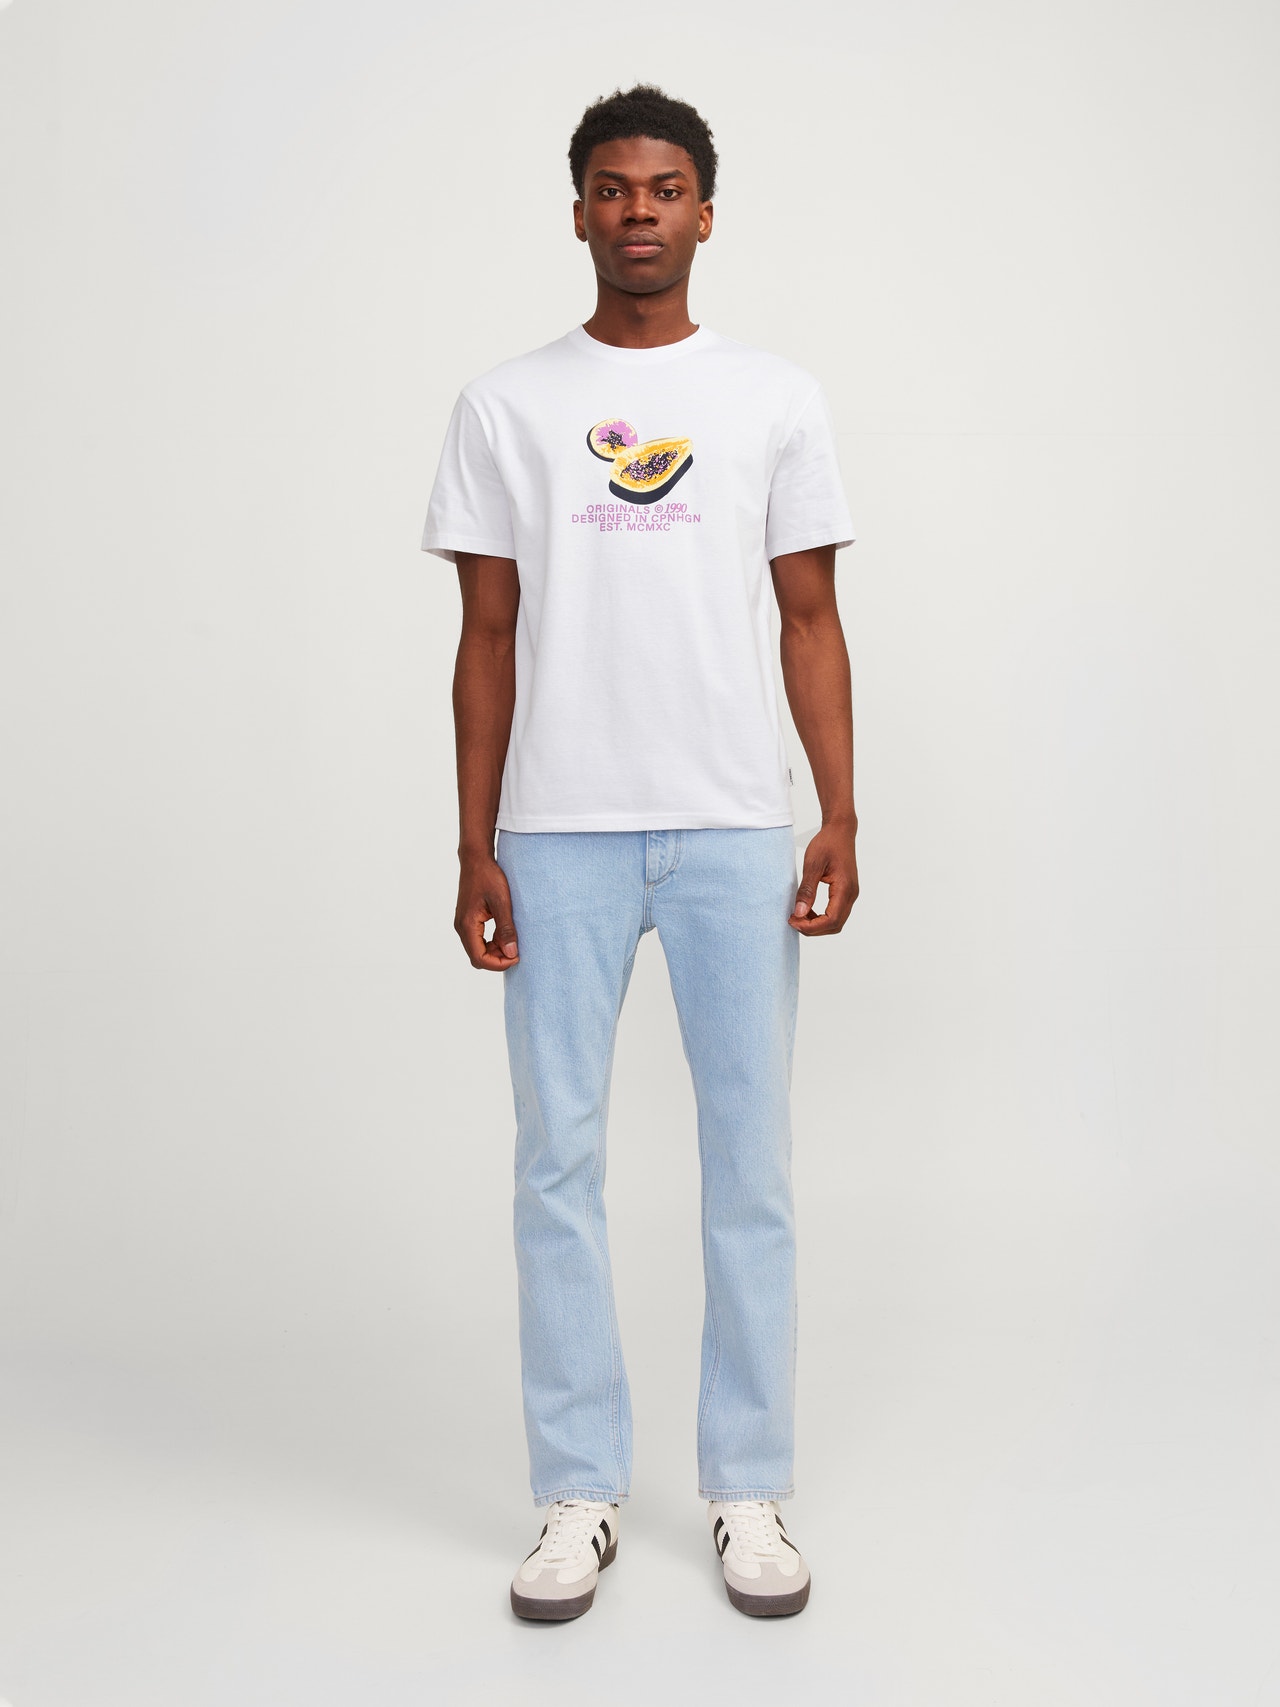 Jack & Jones Relaxed Fit Crew neck T-Shirt -Bright White - 12252173